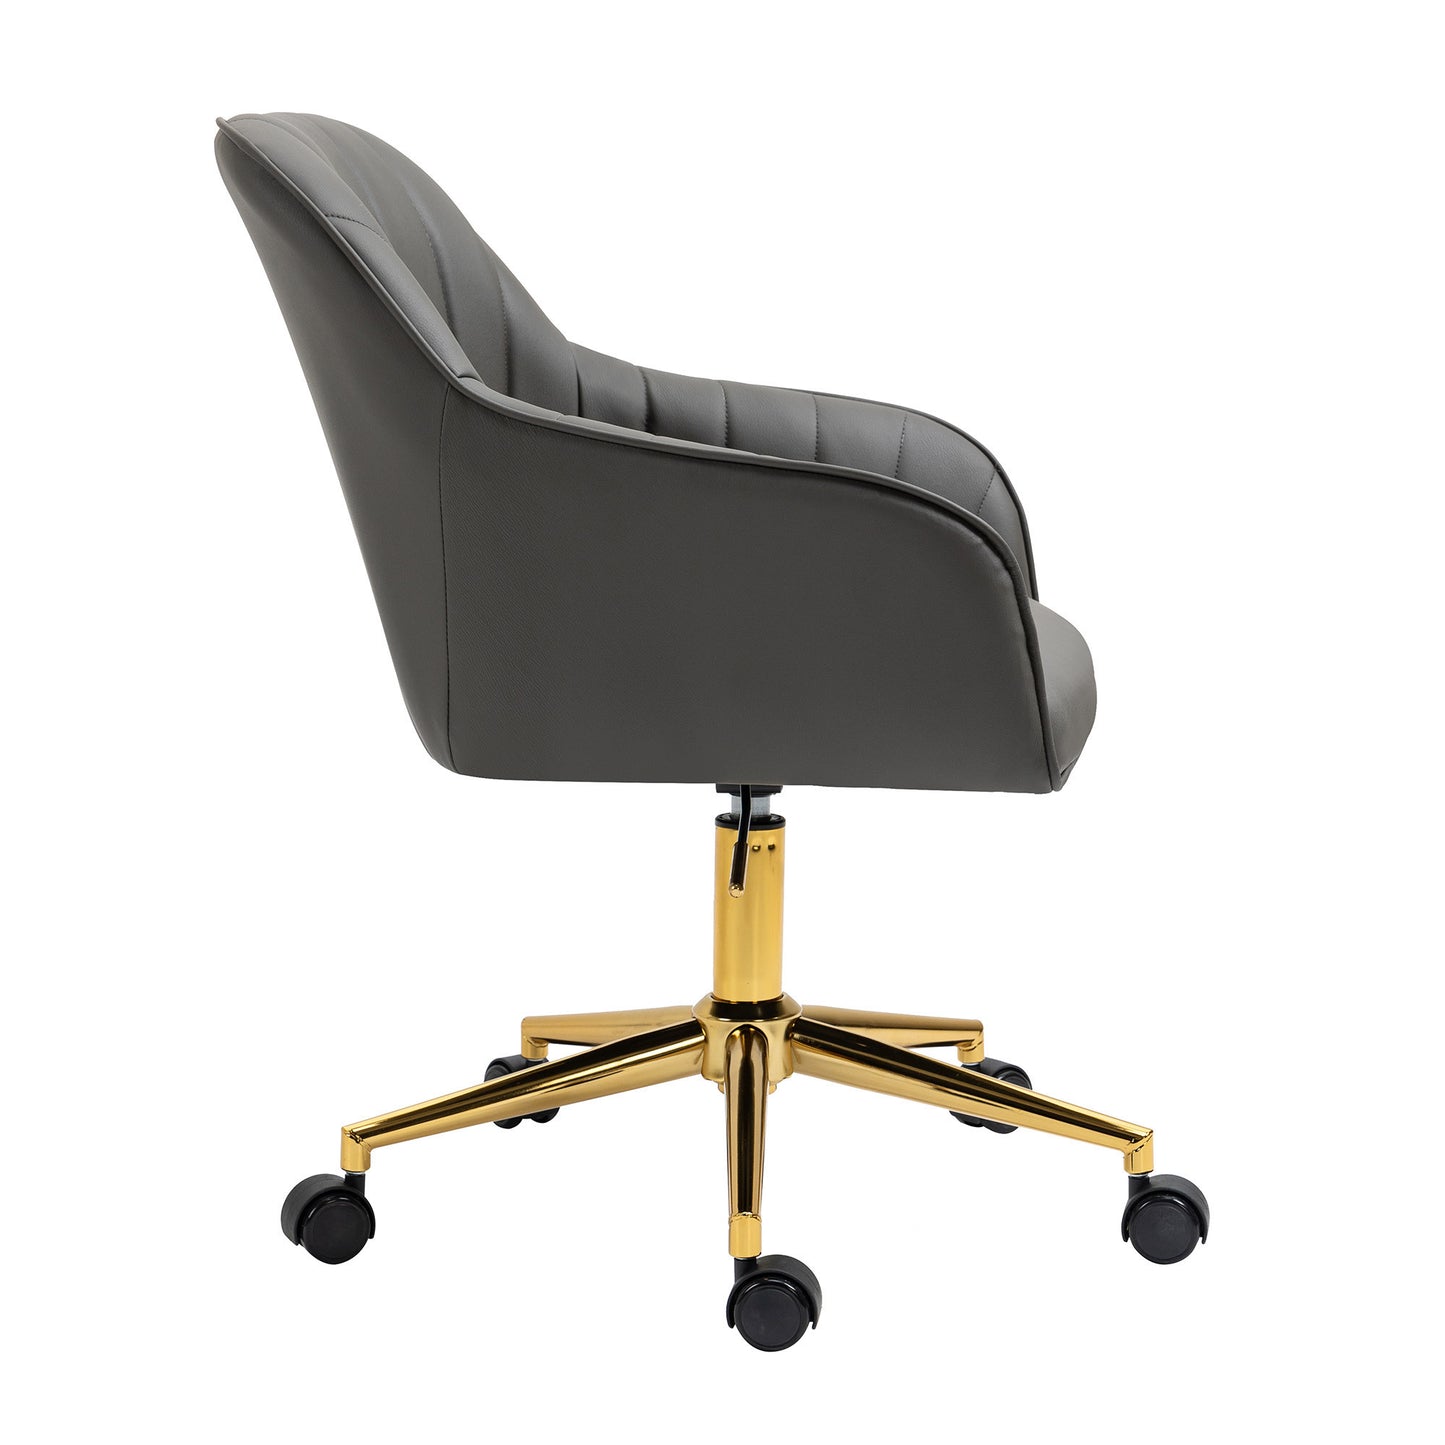 Modern Luxury  High Quality Genuine Leather Office Chair with Adjustable  360° Swivel Height